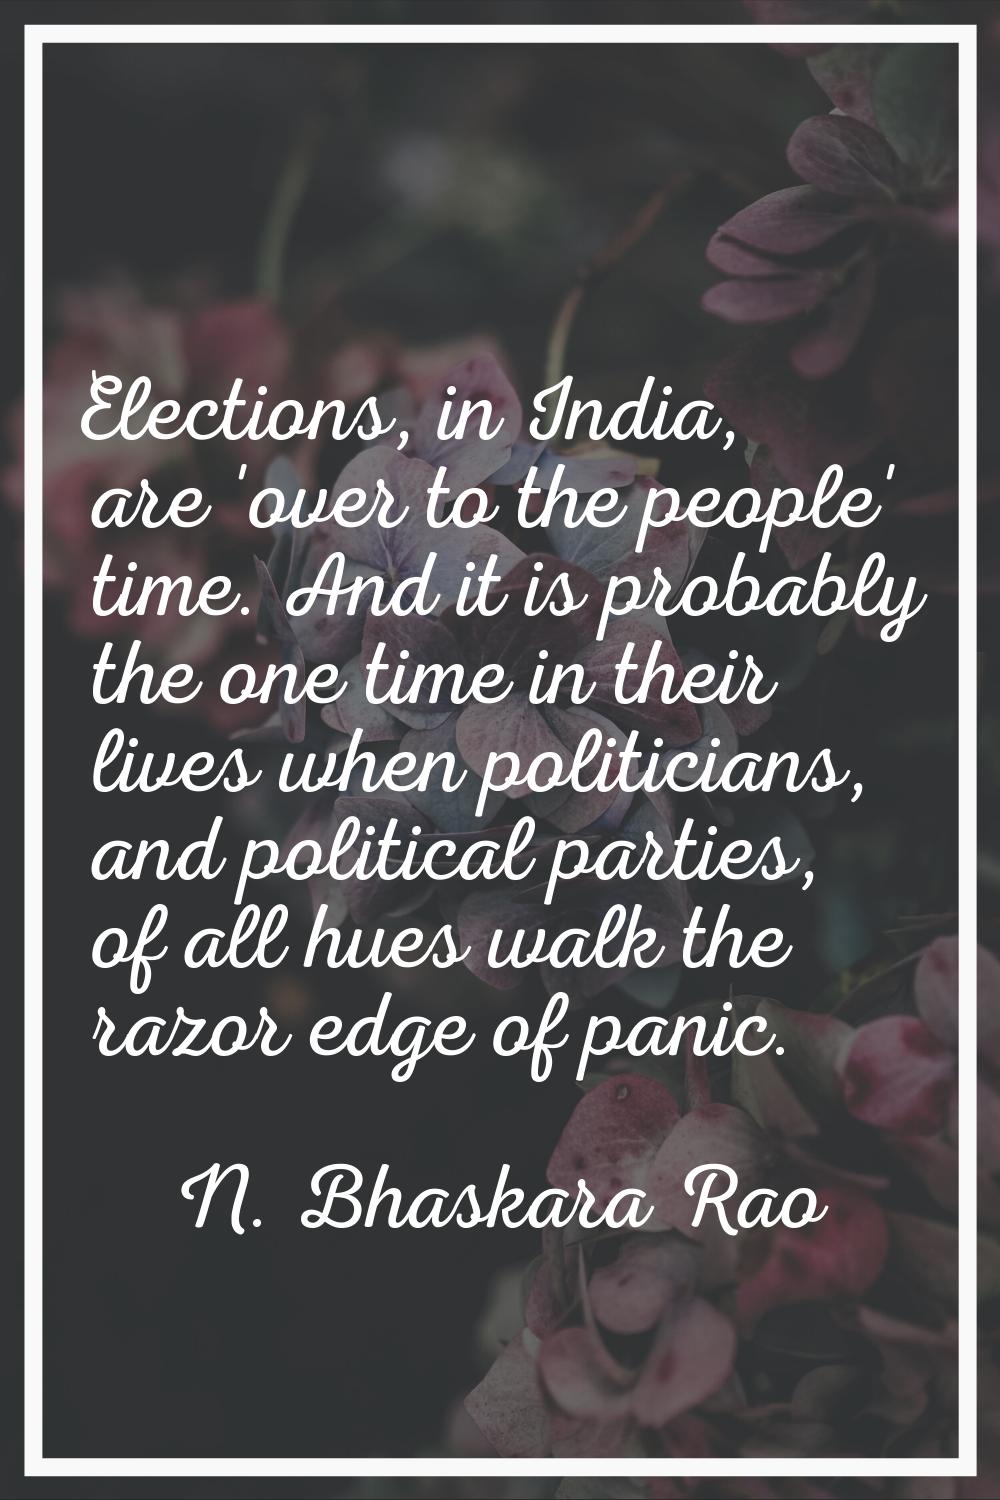 Elections, in India, are 'over to the people' time. And it is probably the one time in their lives 